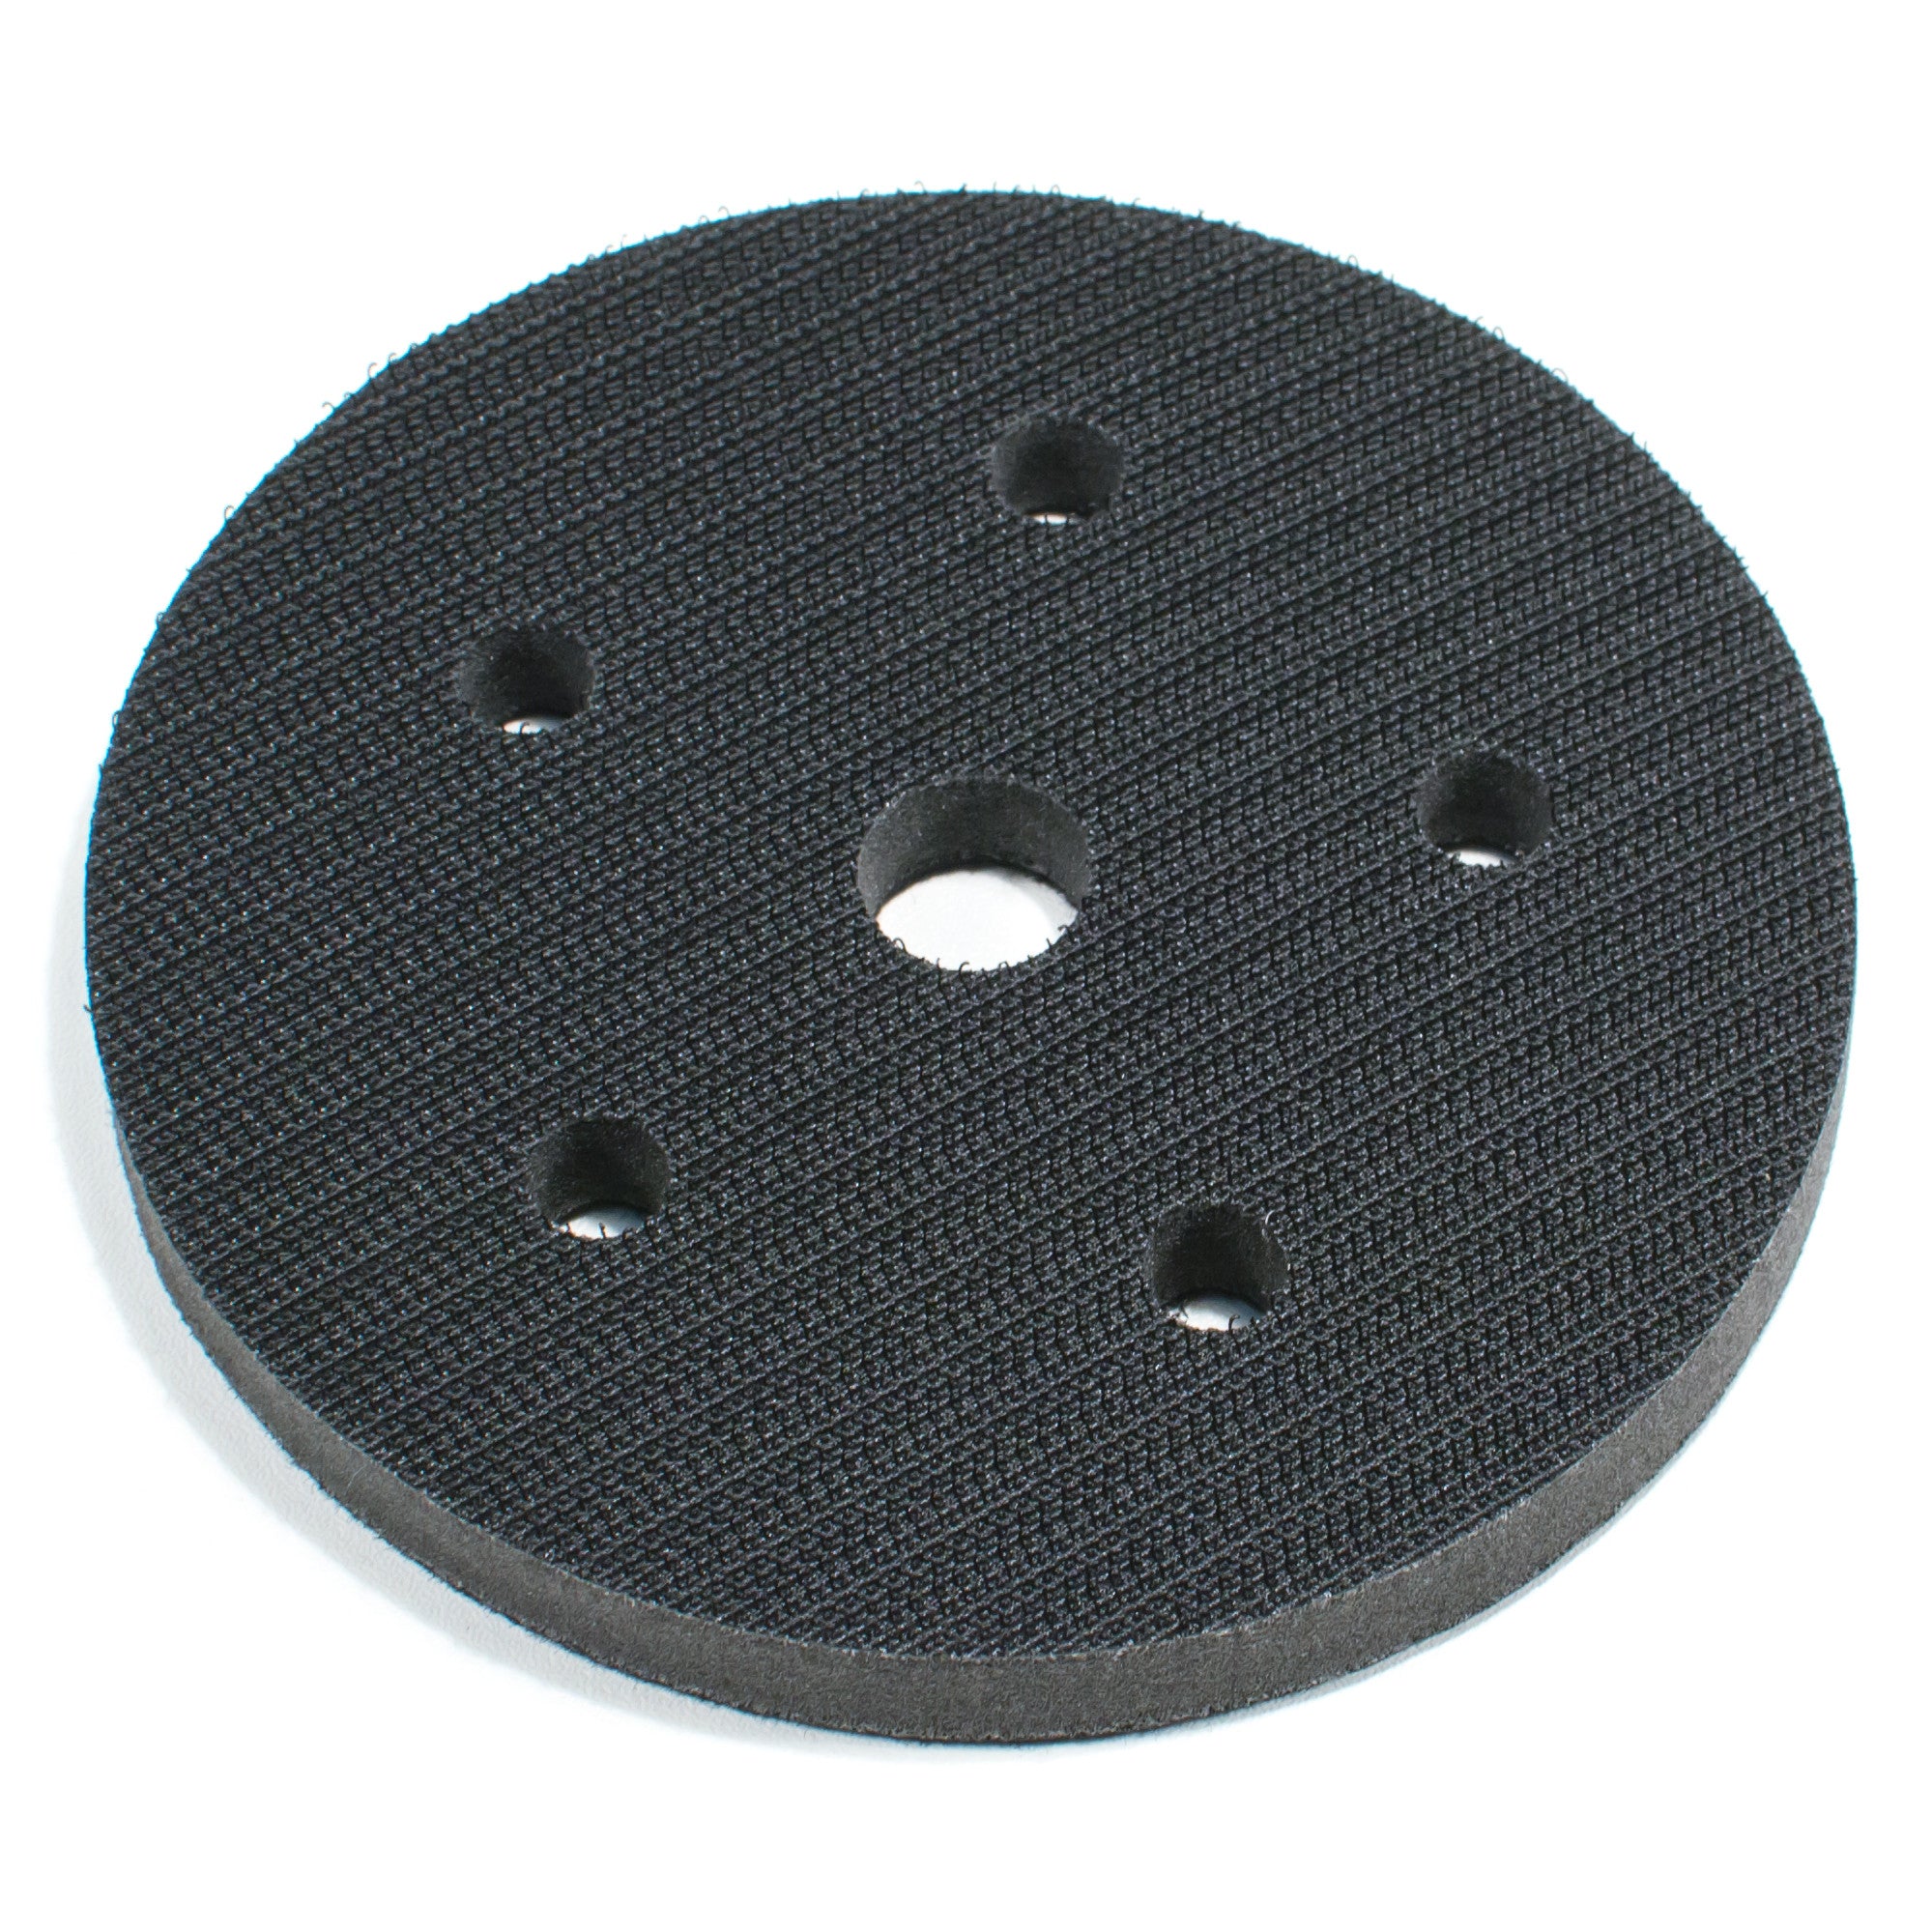 5" - 5 Hole Soft Density Interface Pad - Hook and Loop